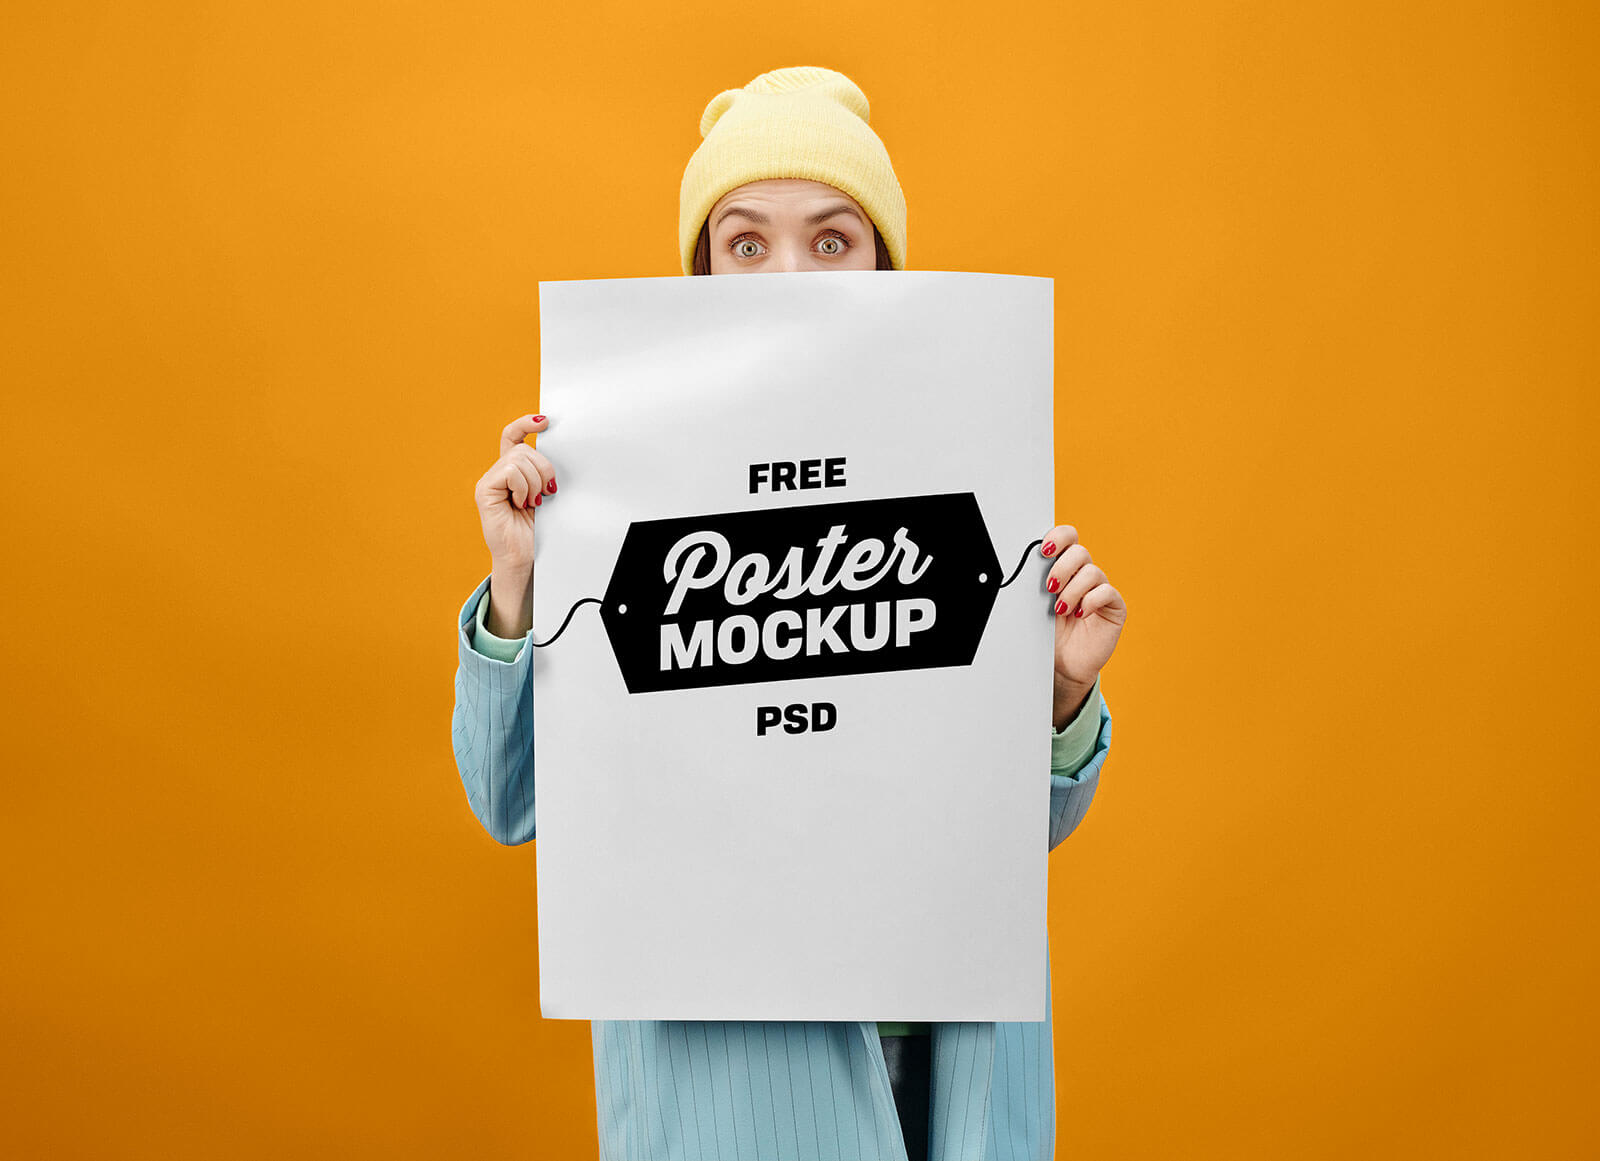 Free-Hand-Holding-By-Female-Poster-Mockup-PSD